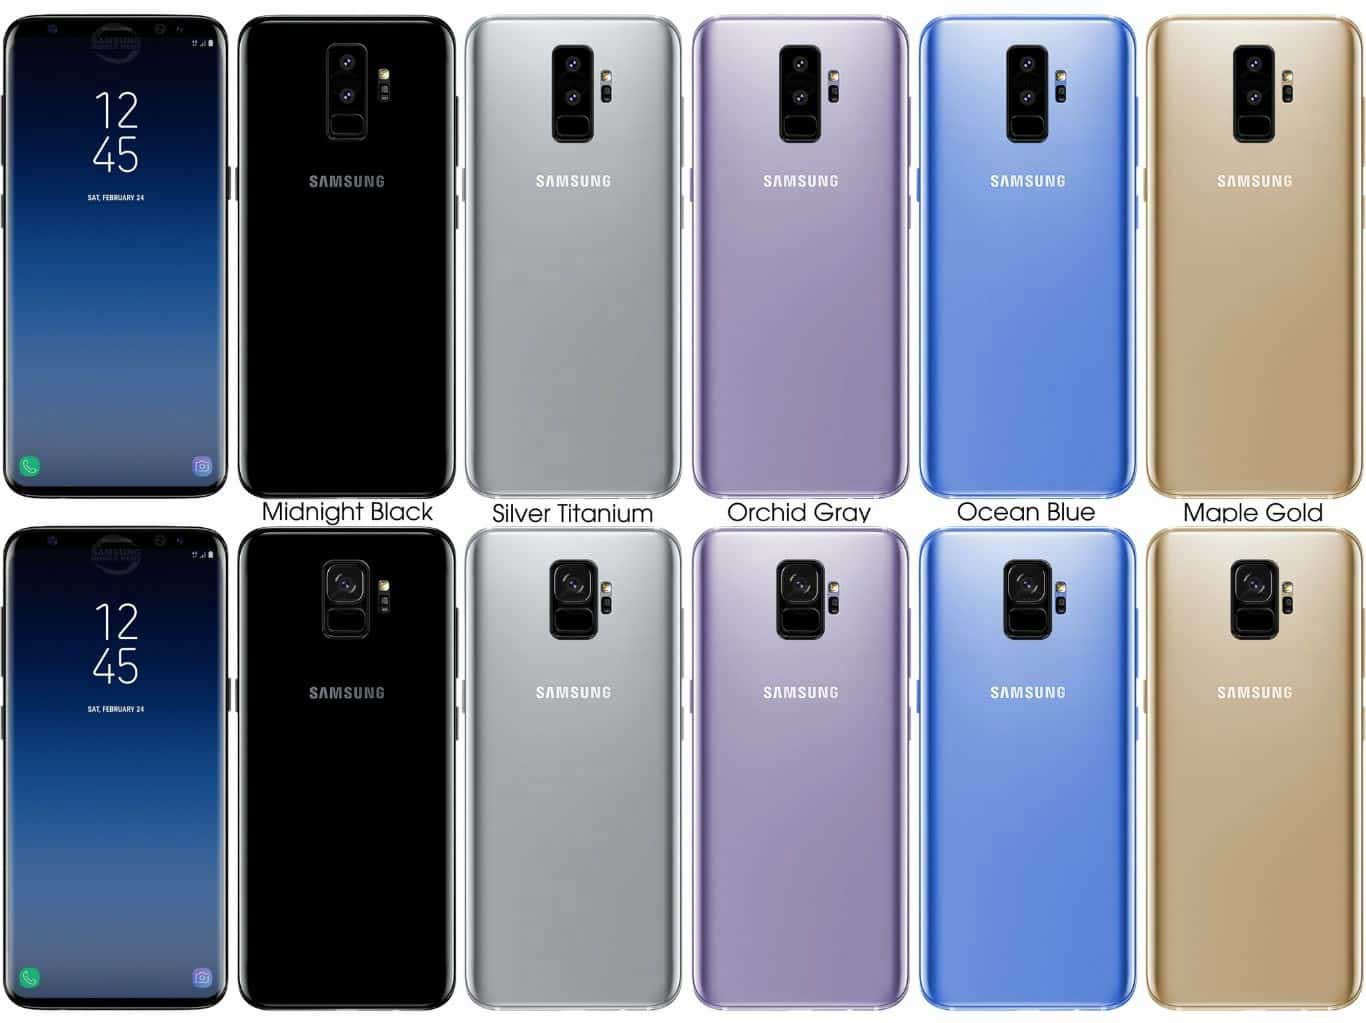 Samsung confirms that the new flagship Galaxy S9 will be released in February this year